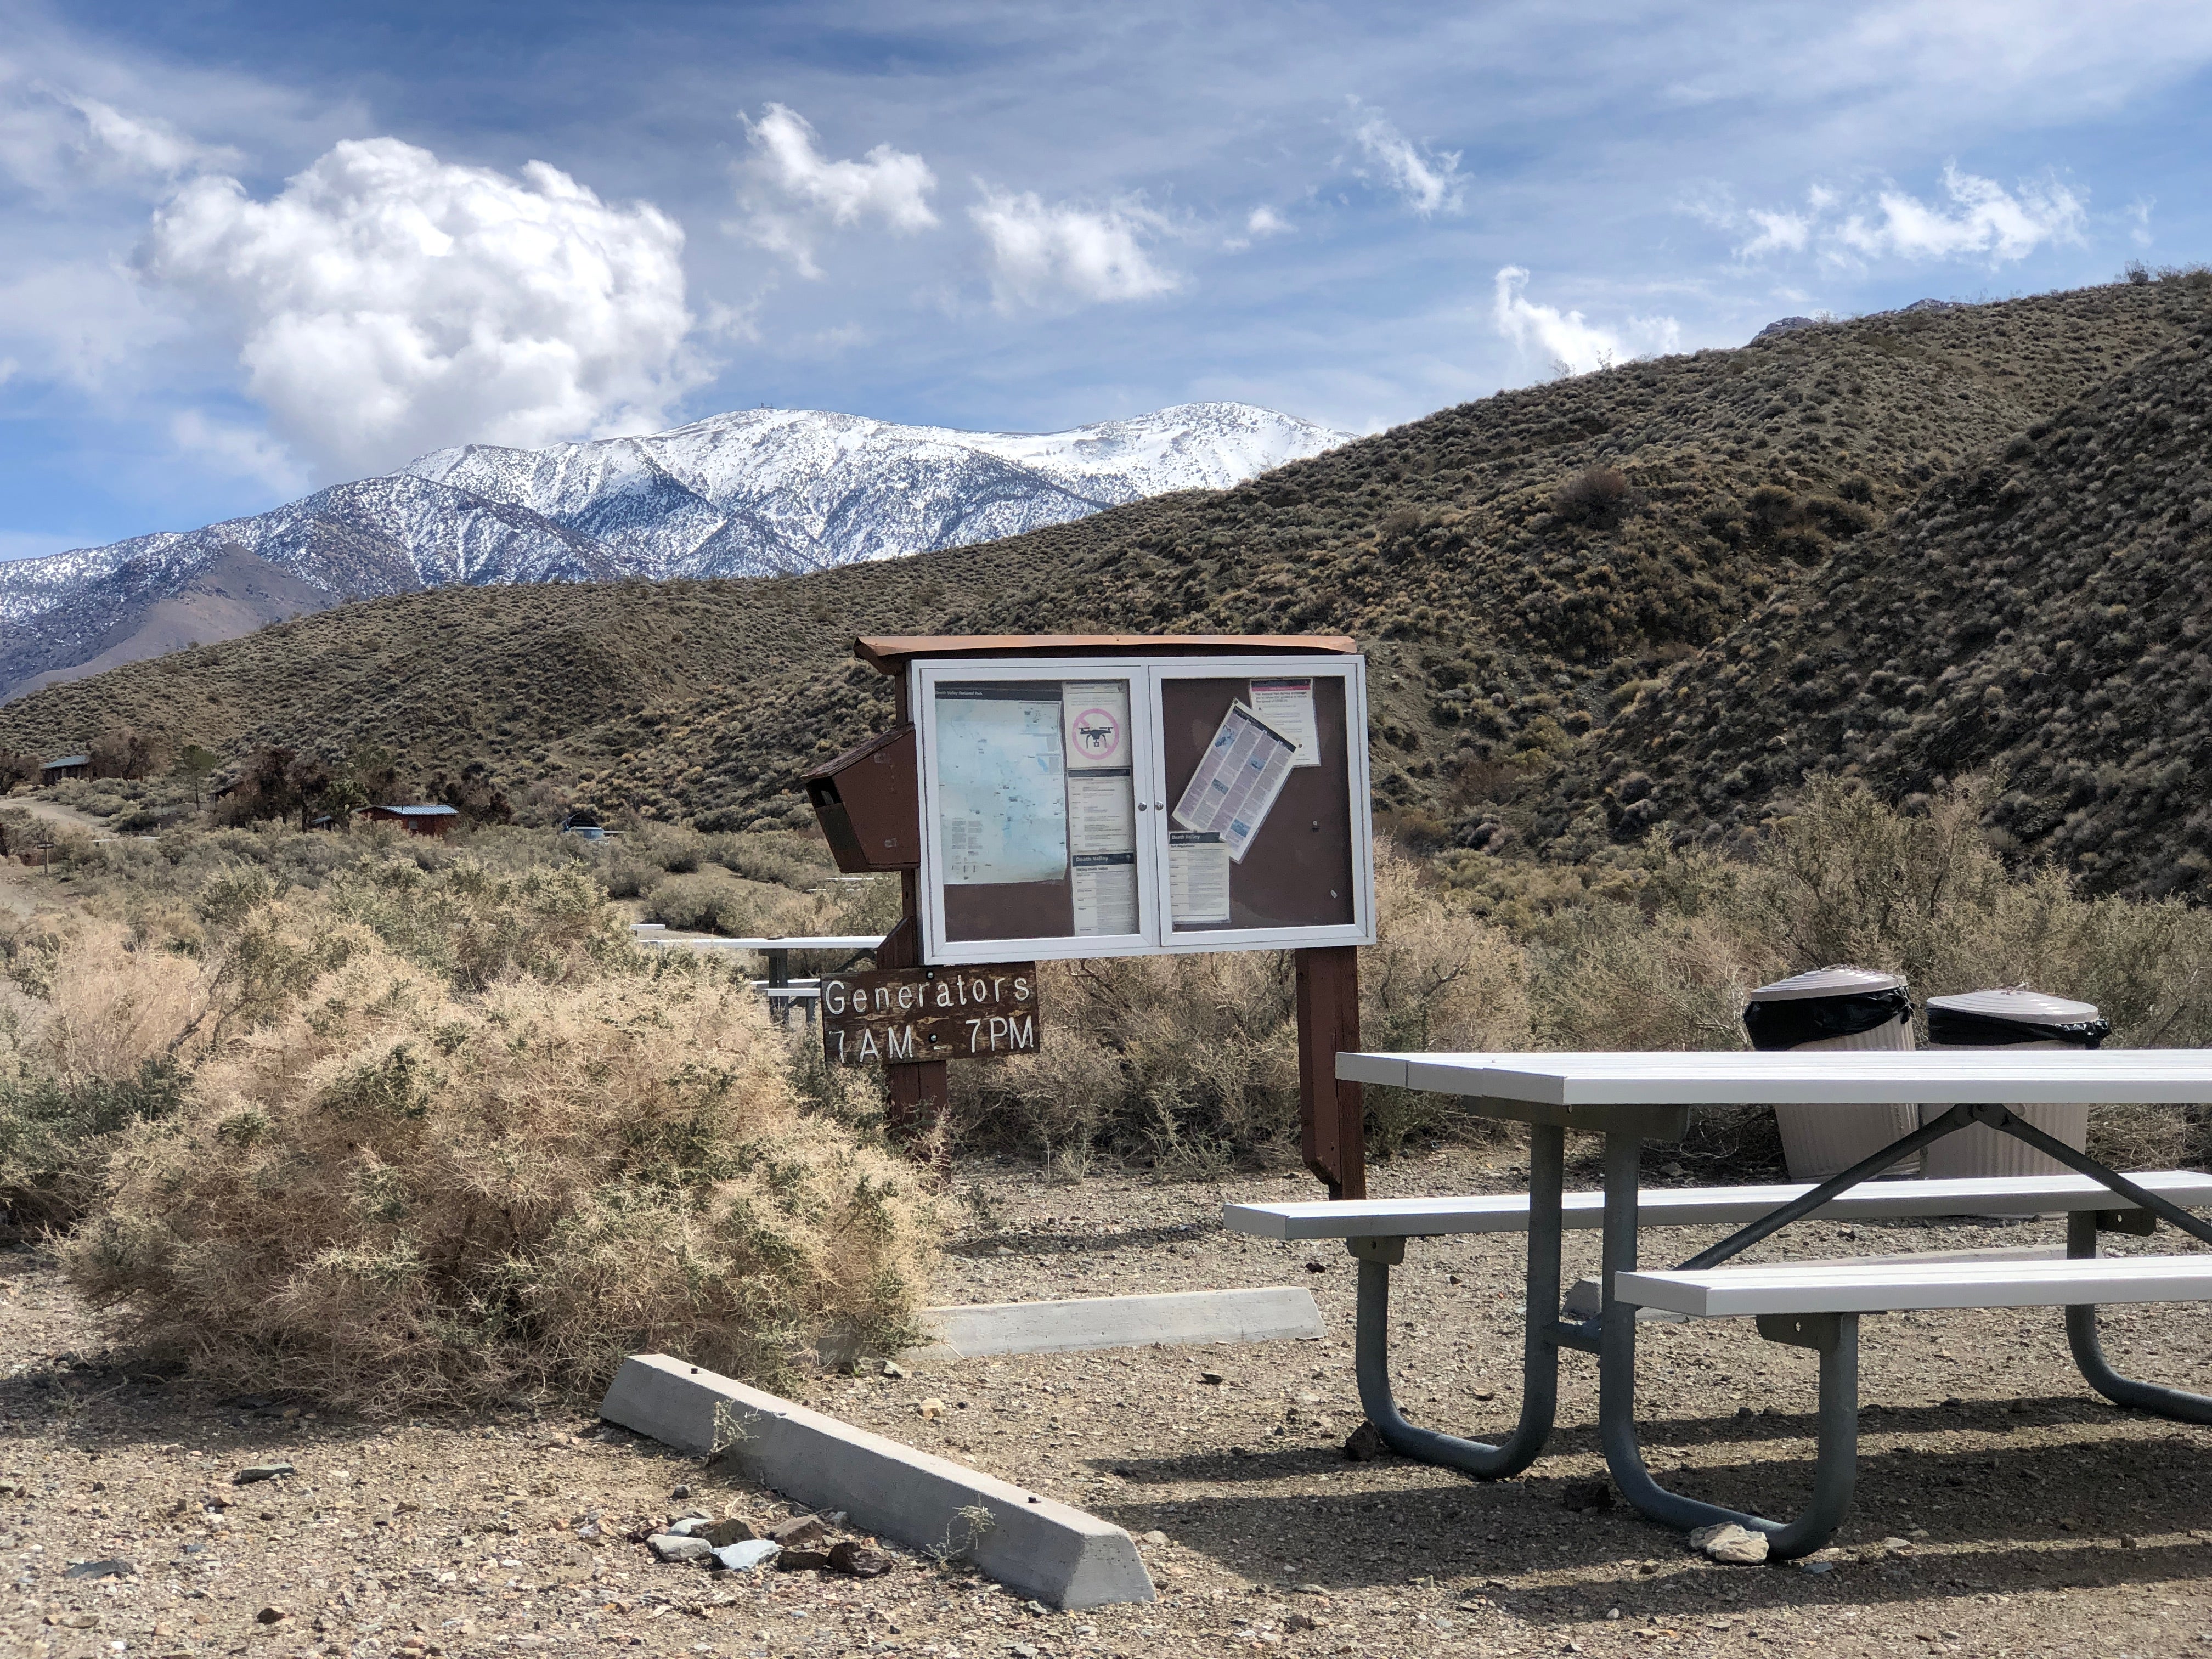 Camper submitted image from Wildrose Campground in Death Valley - 2